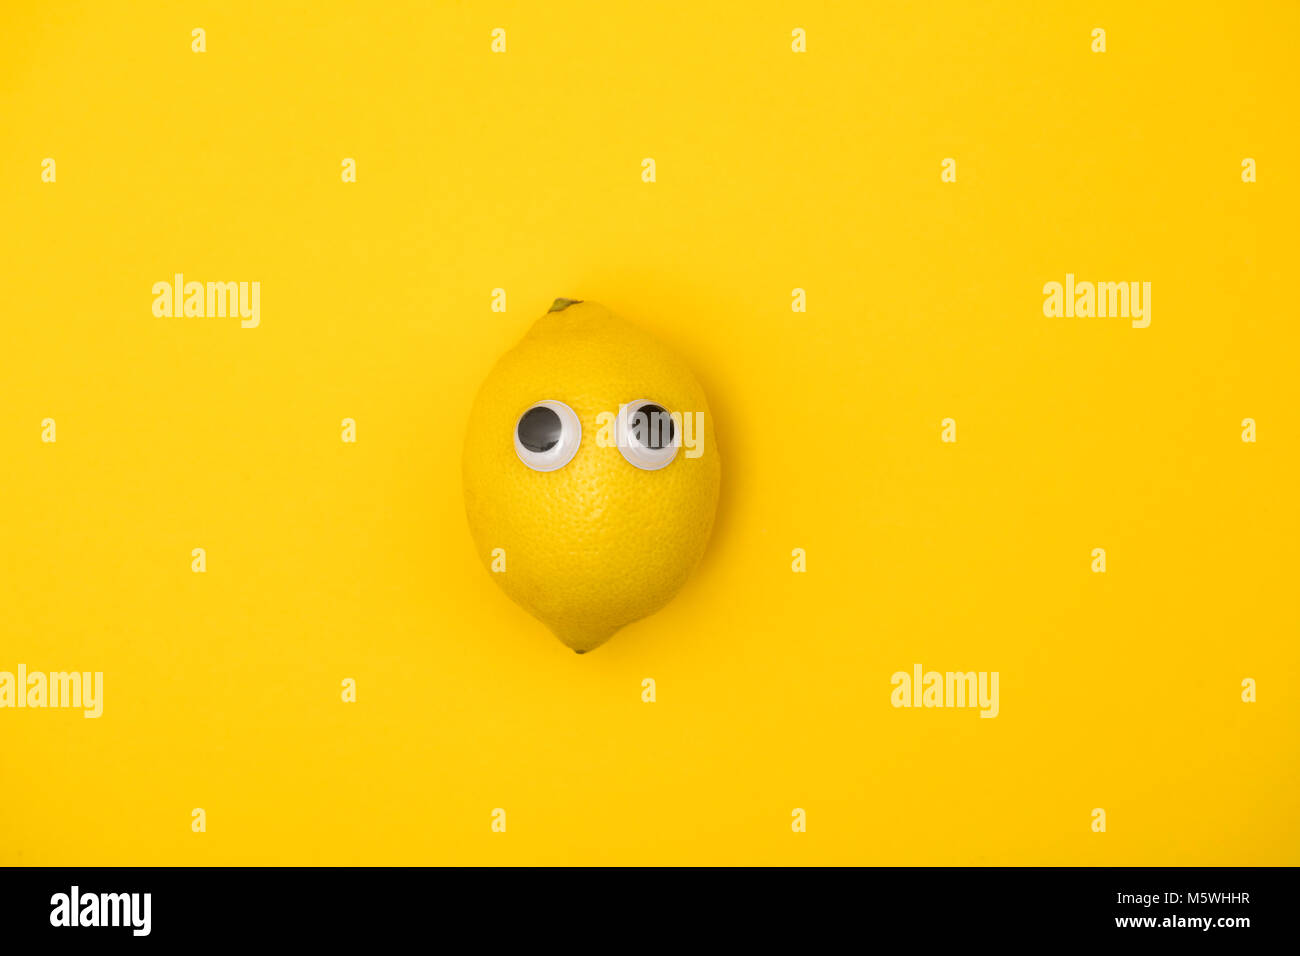 Yellow lemon face with comedy googly eyes Stock Photo